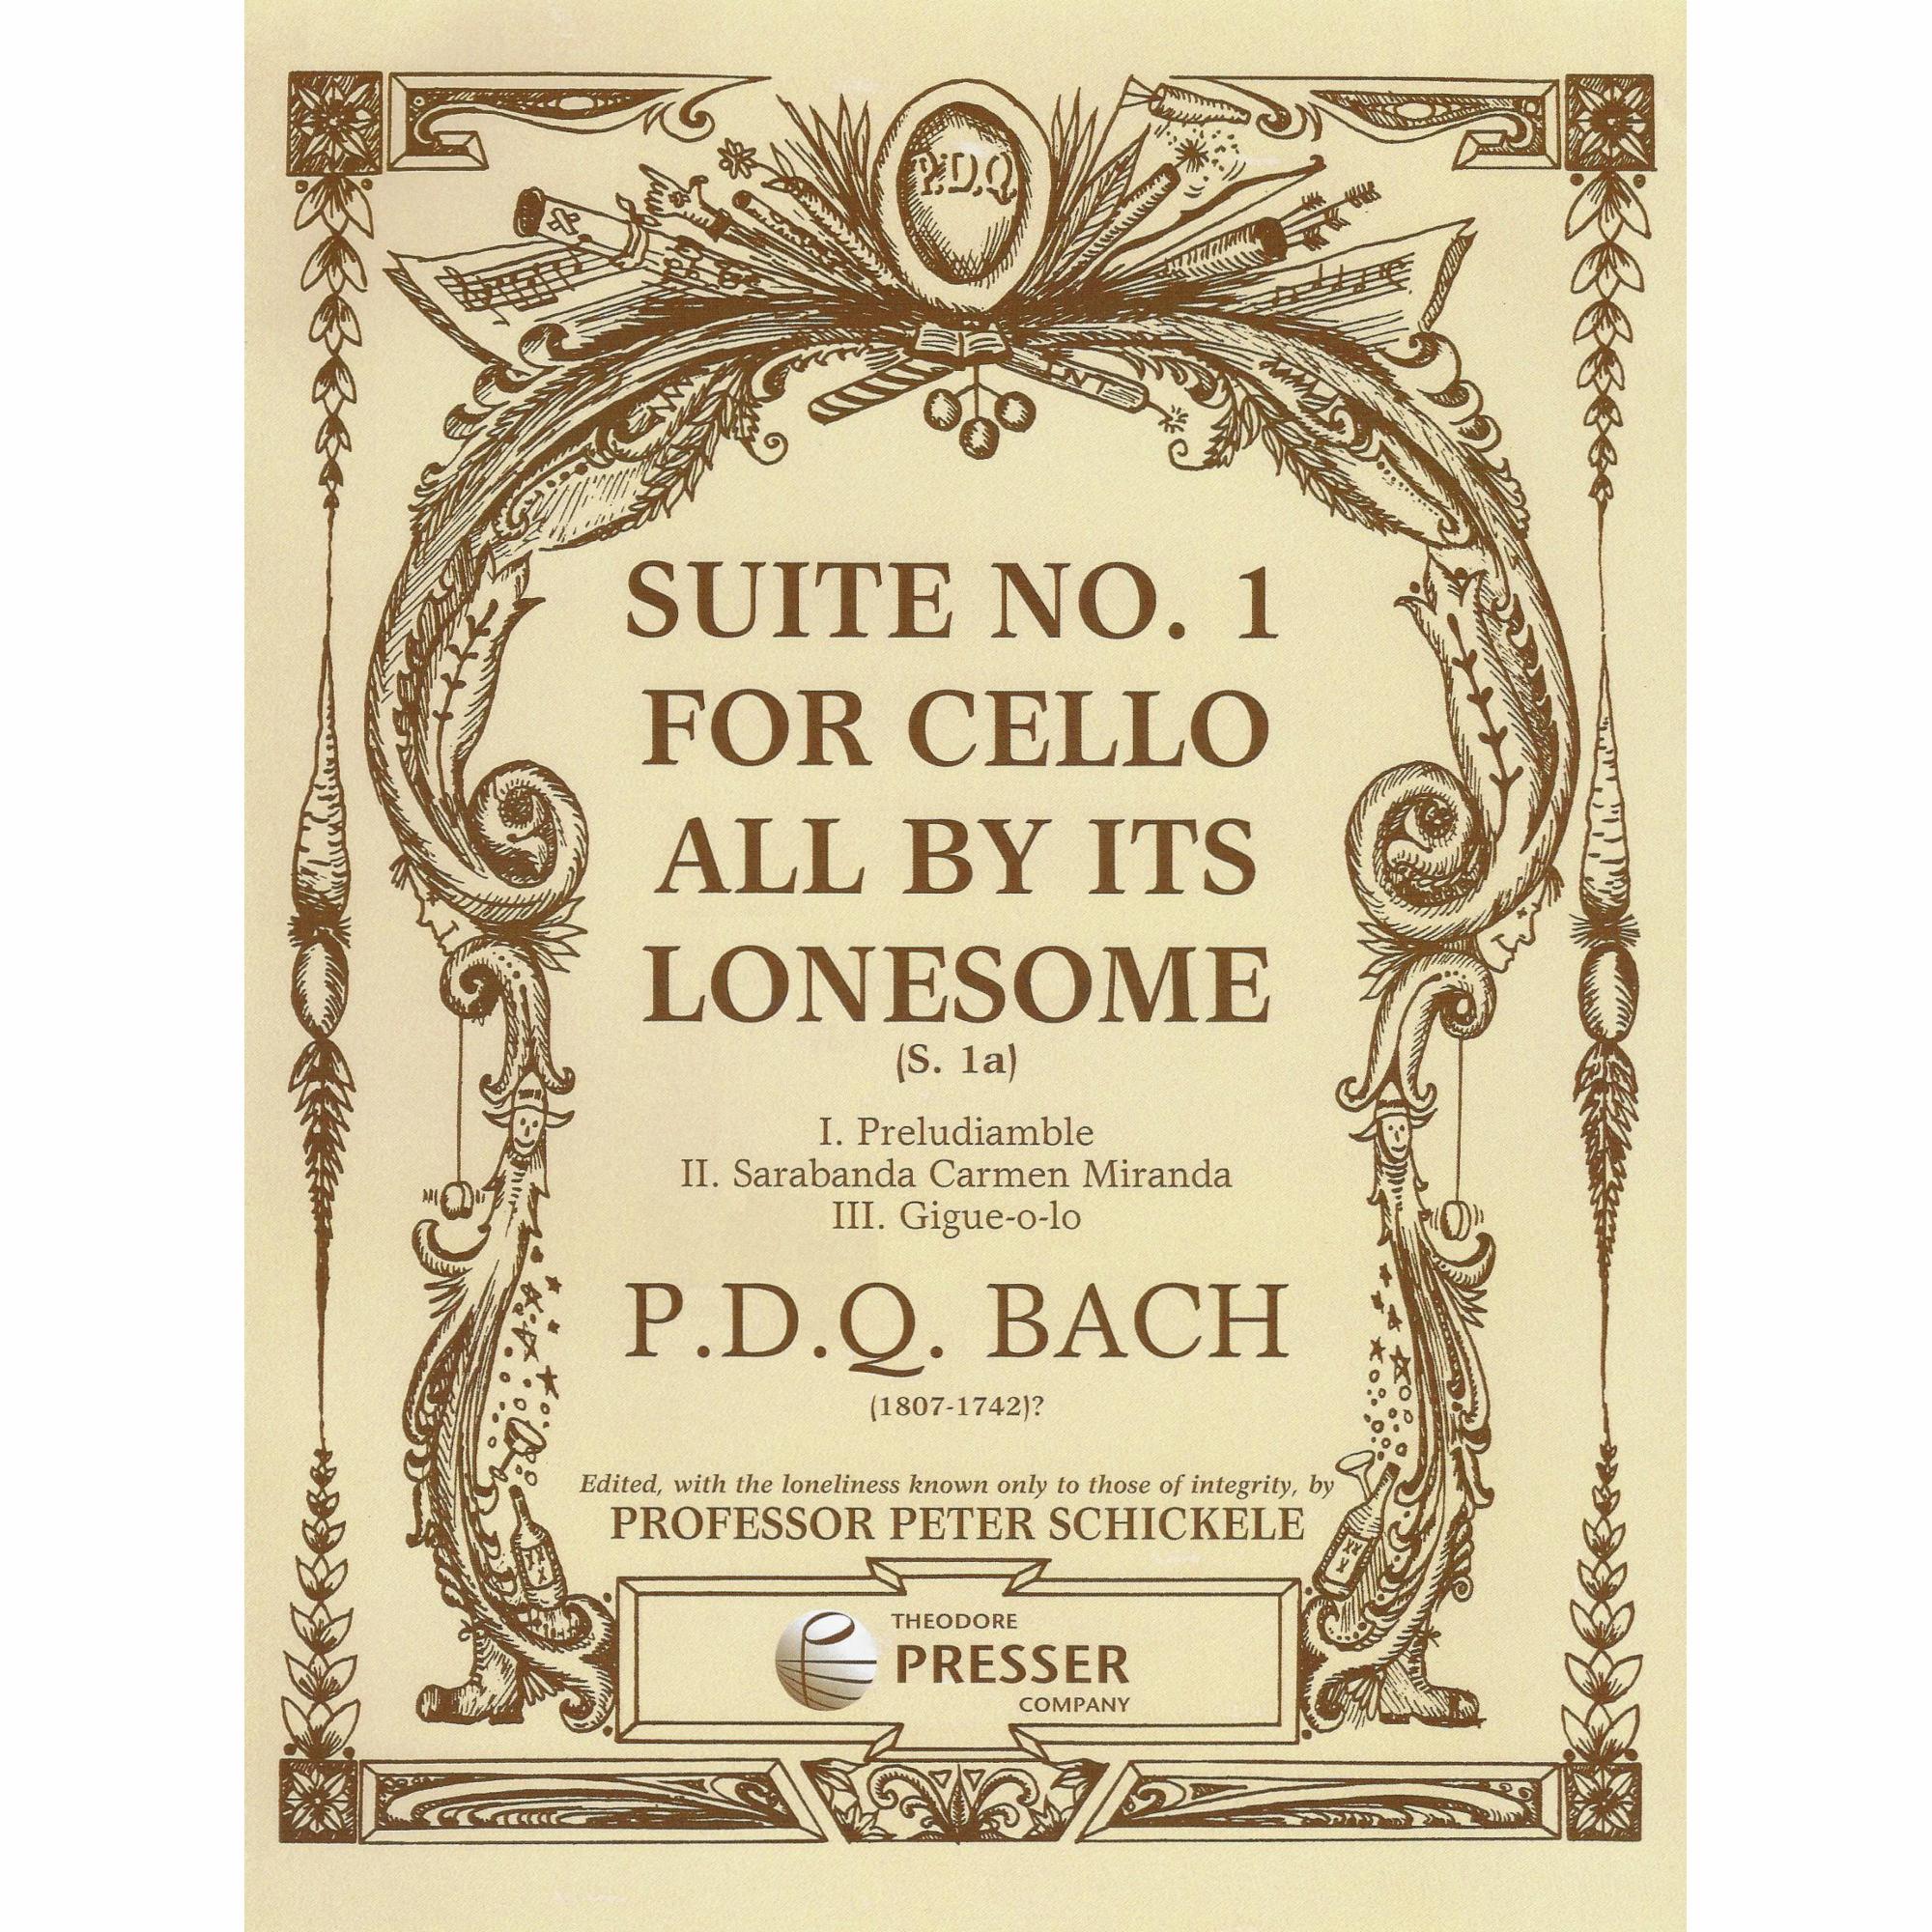 P.D.Q. Bach -- Suite No. 1 for Cello All By Its Lonesome